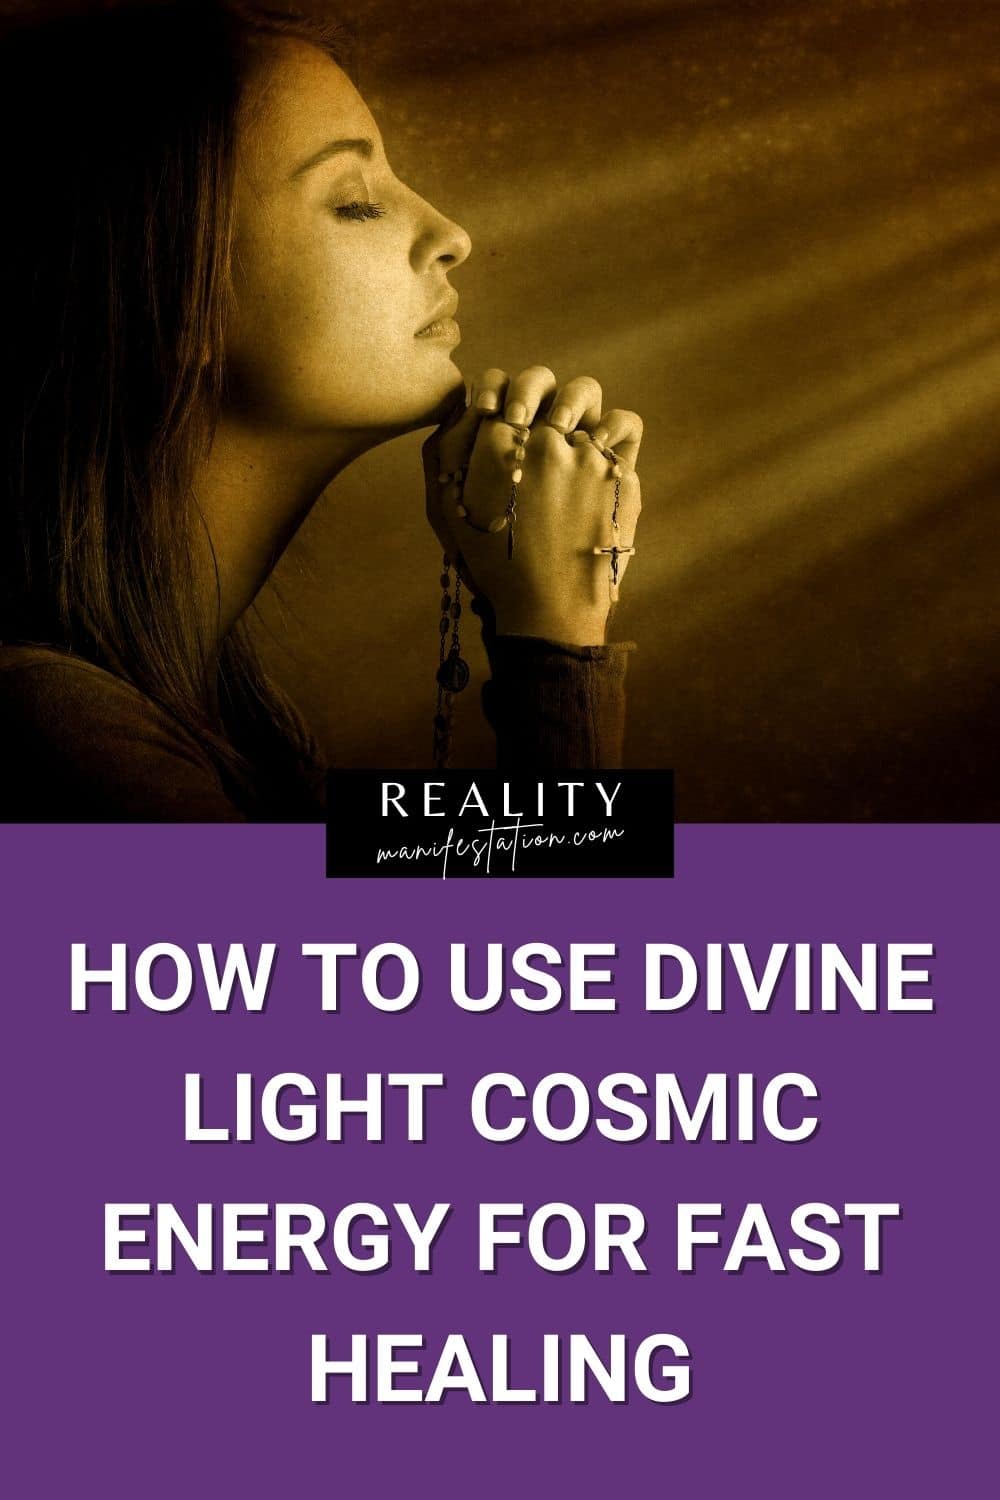 Woman praying with light shining down on her with text underneath saying Discover how the top lightworkers use divine light to heal the easy way with the help of their spirit guides.